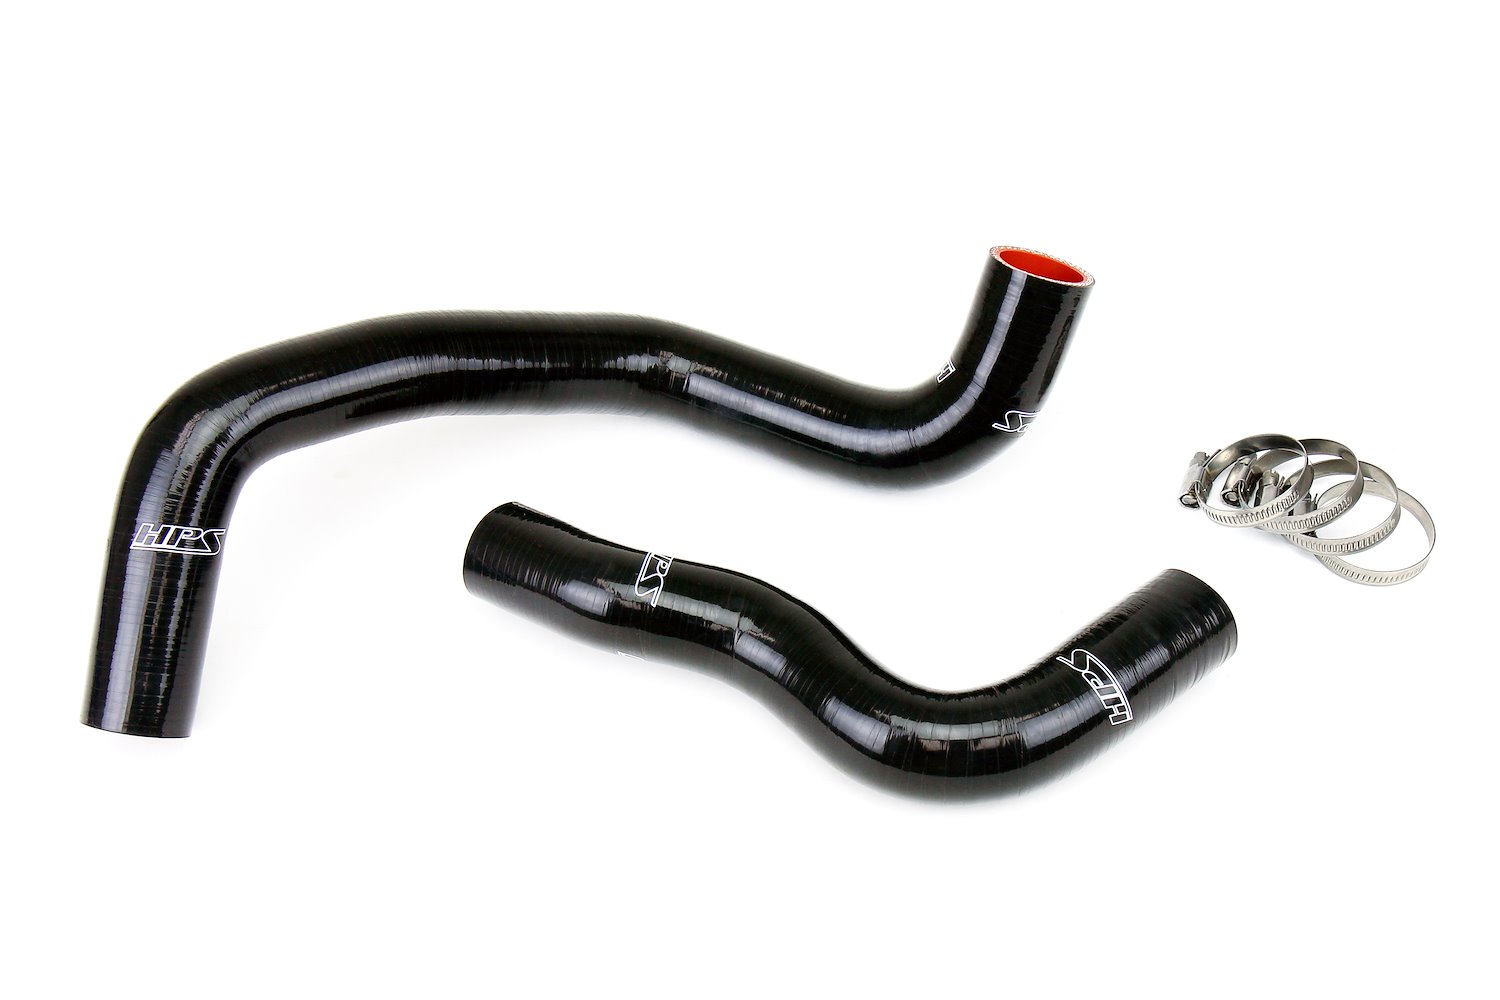 57-1833-BLK Radiator Hose Kit, 3-Ply Reinforced Silicone, Replaces Rubber Radiator Coolant Hoses